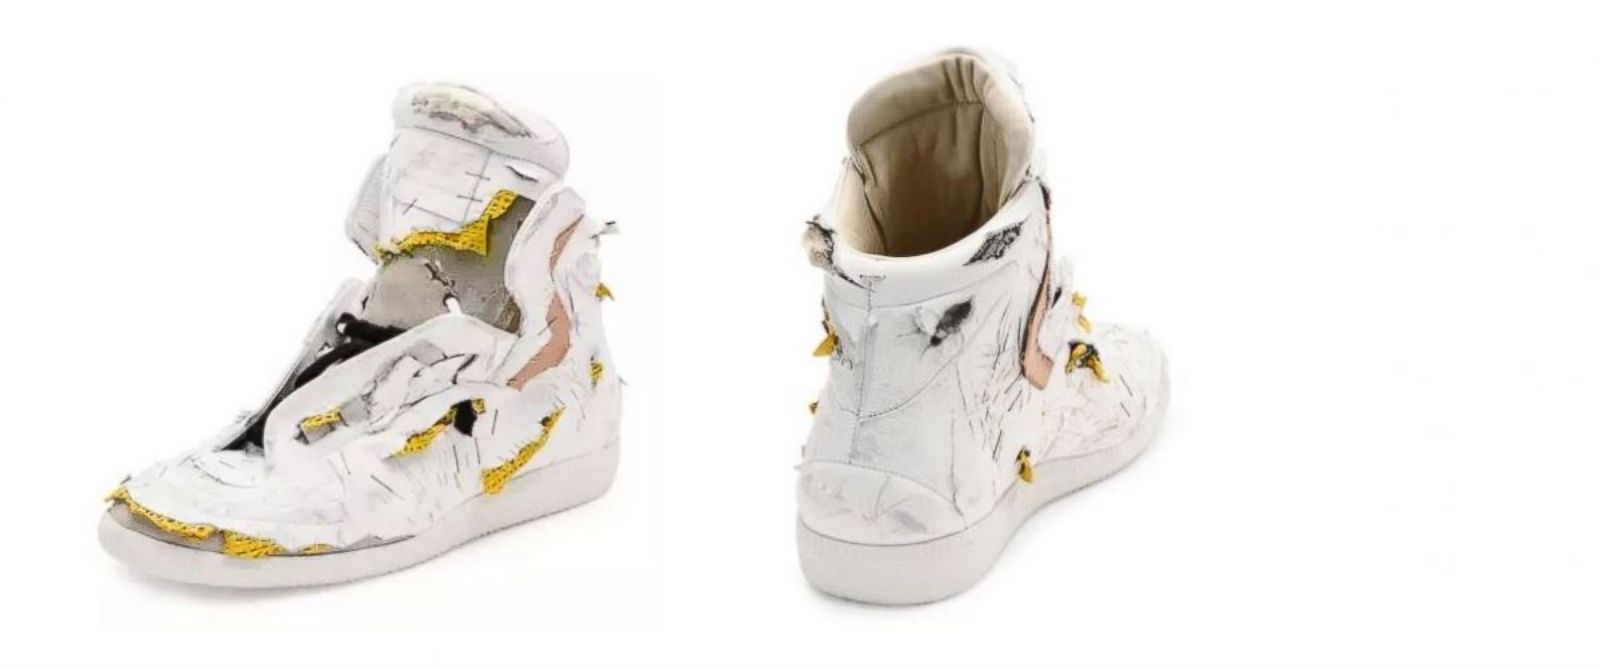 More distressing fashion news: Neiman Marcus sells $1,425 torn sneakers ...